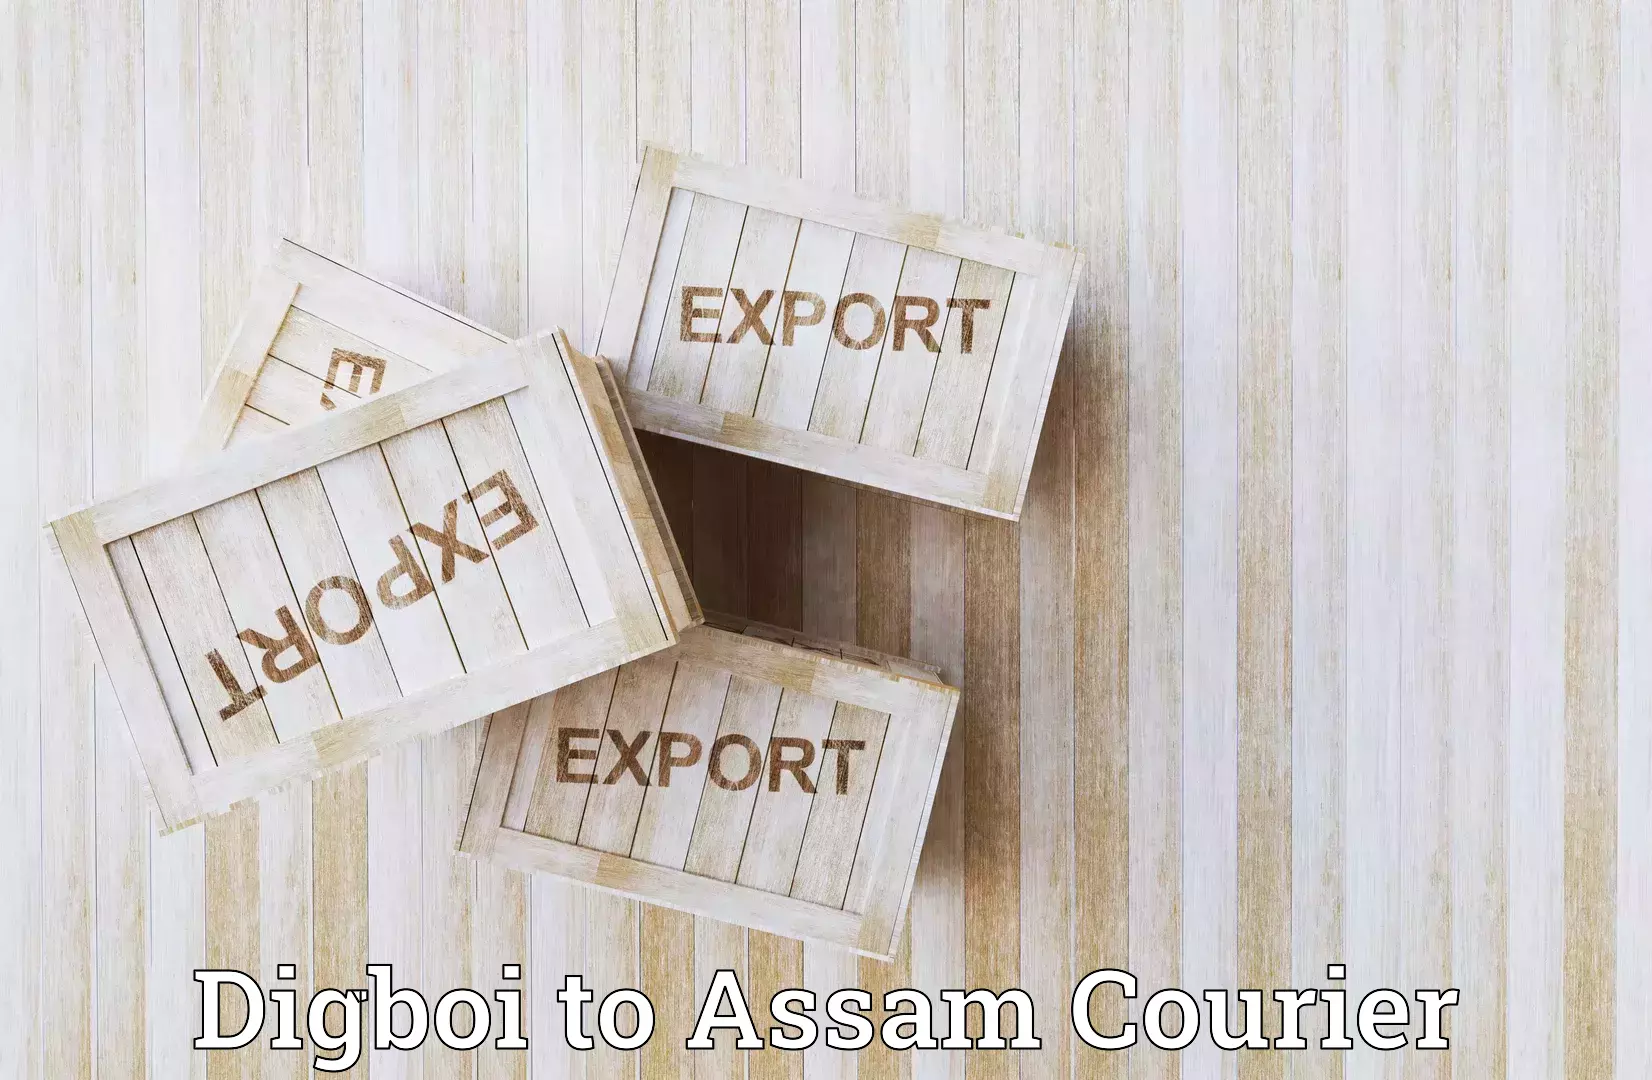 Courier service efficiency in Digboi to Silchar